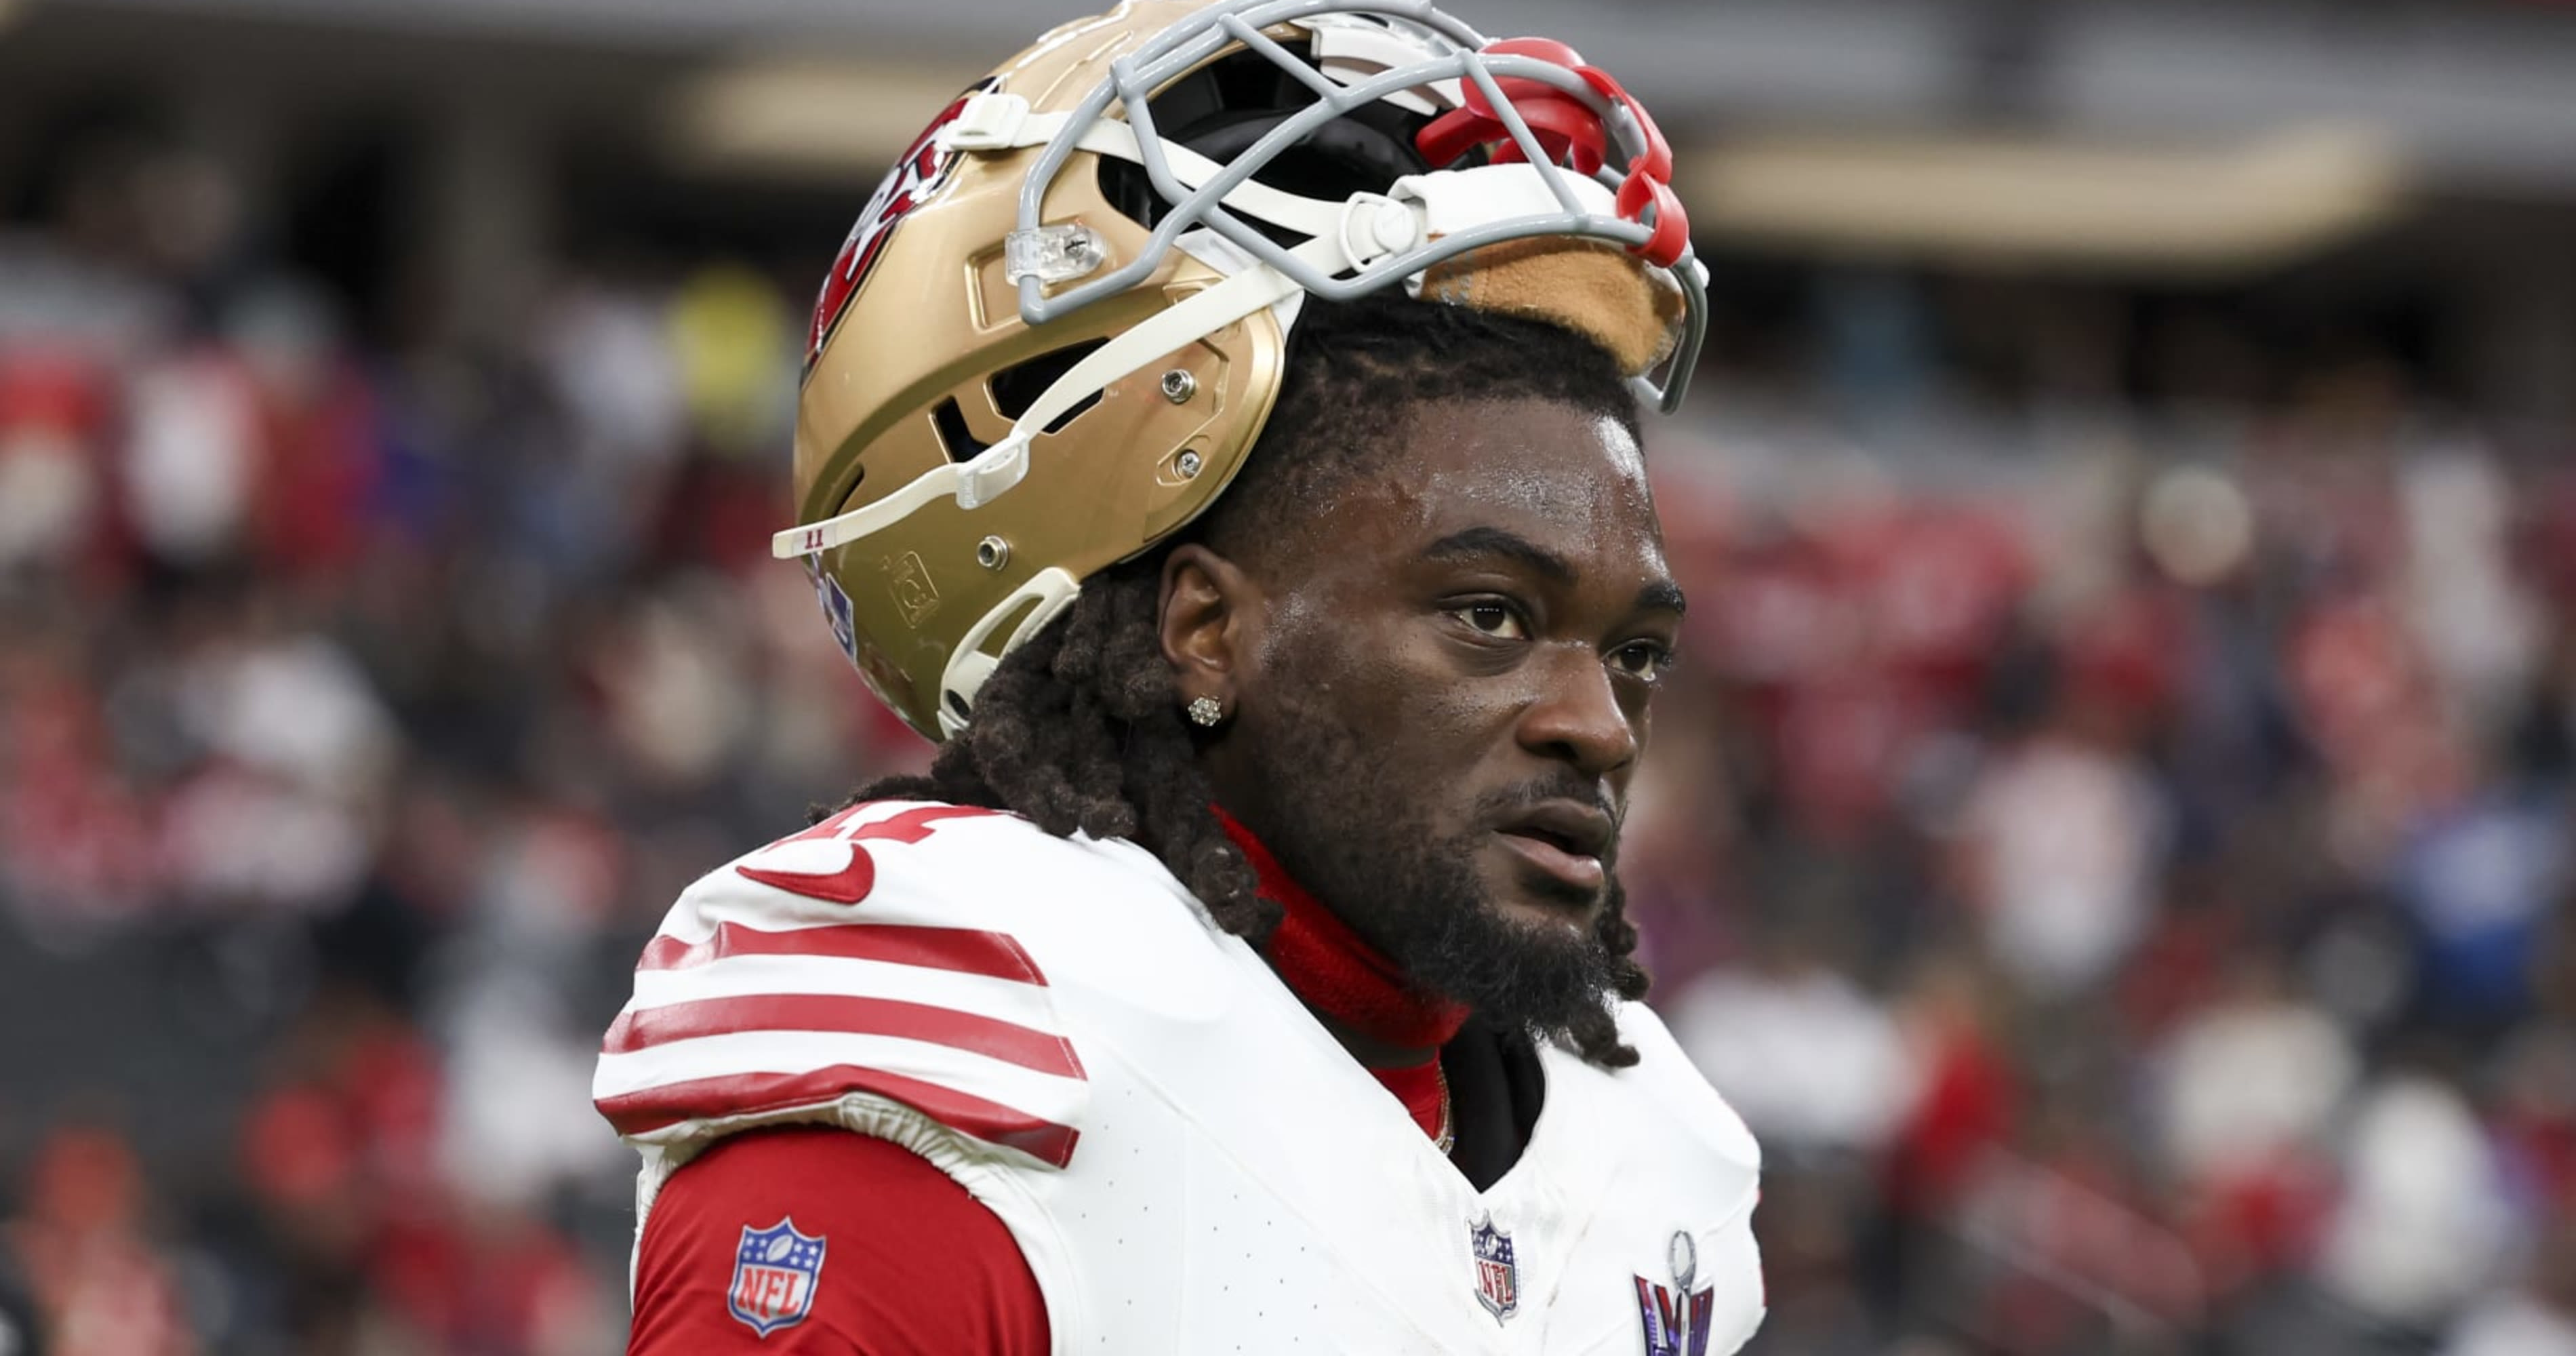 NFL Rumors: 49ers Focused on Keeping Brandon Aiyuk Amid Trade, Contract Buzz